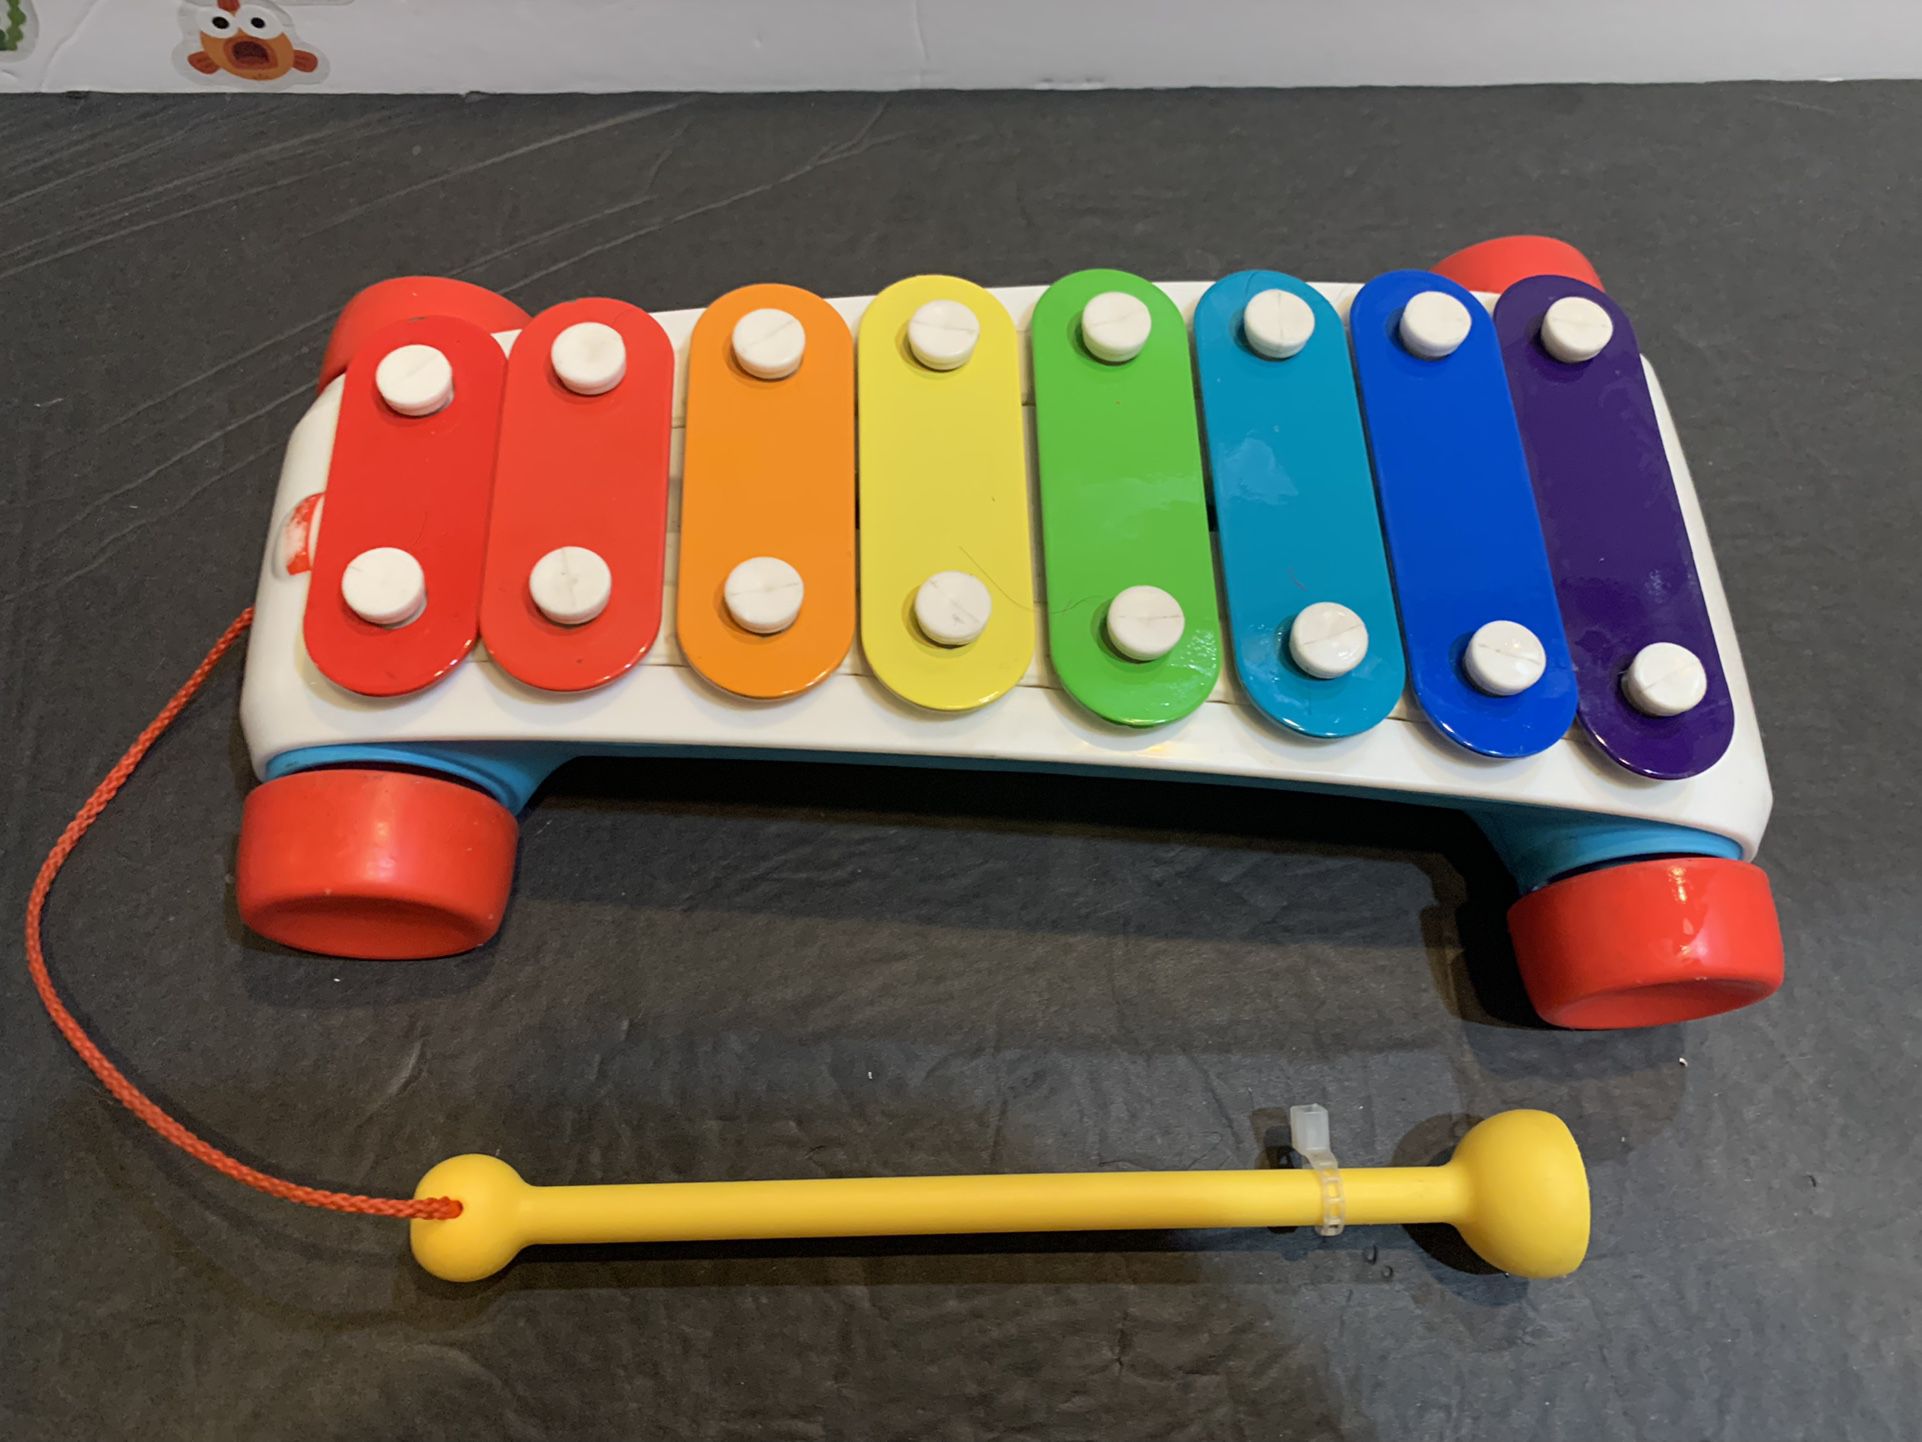 Xylophone By Fisher Price - A Classic Toy For Baby - NEW CONDITION 